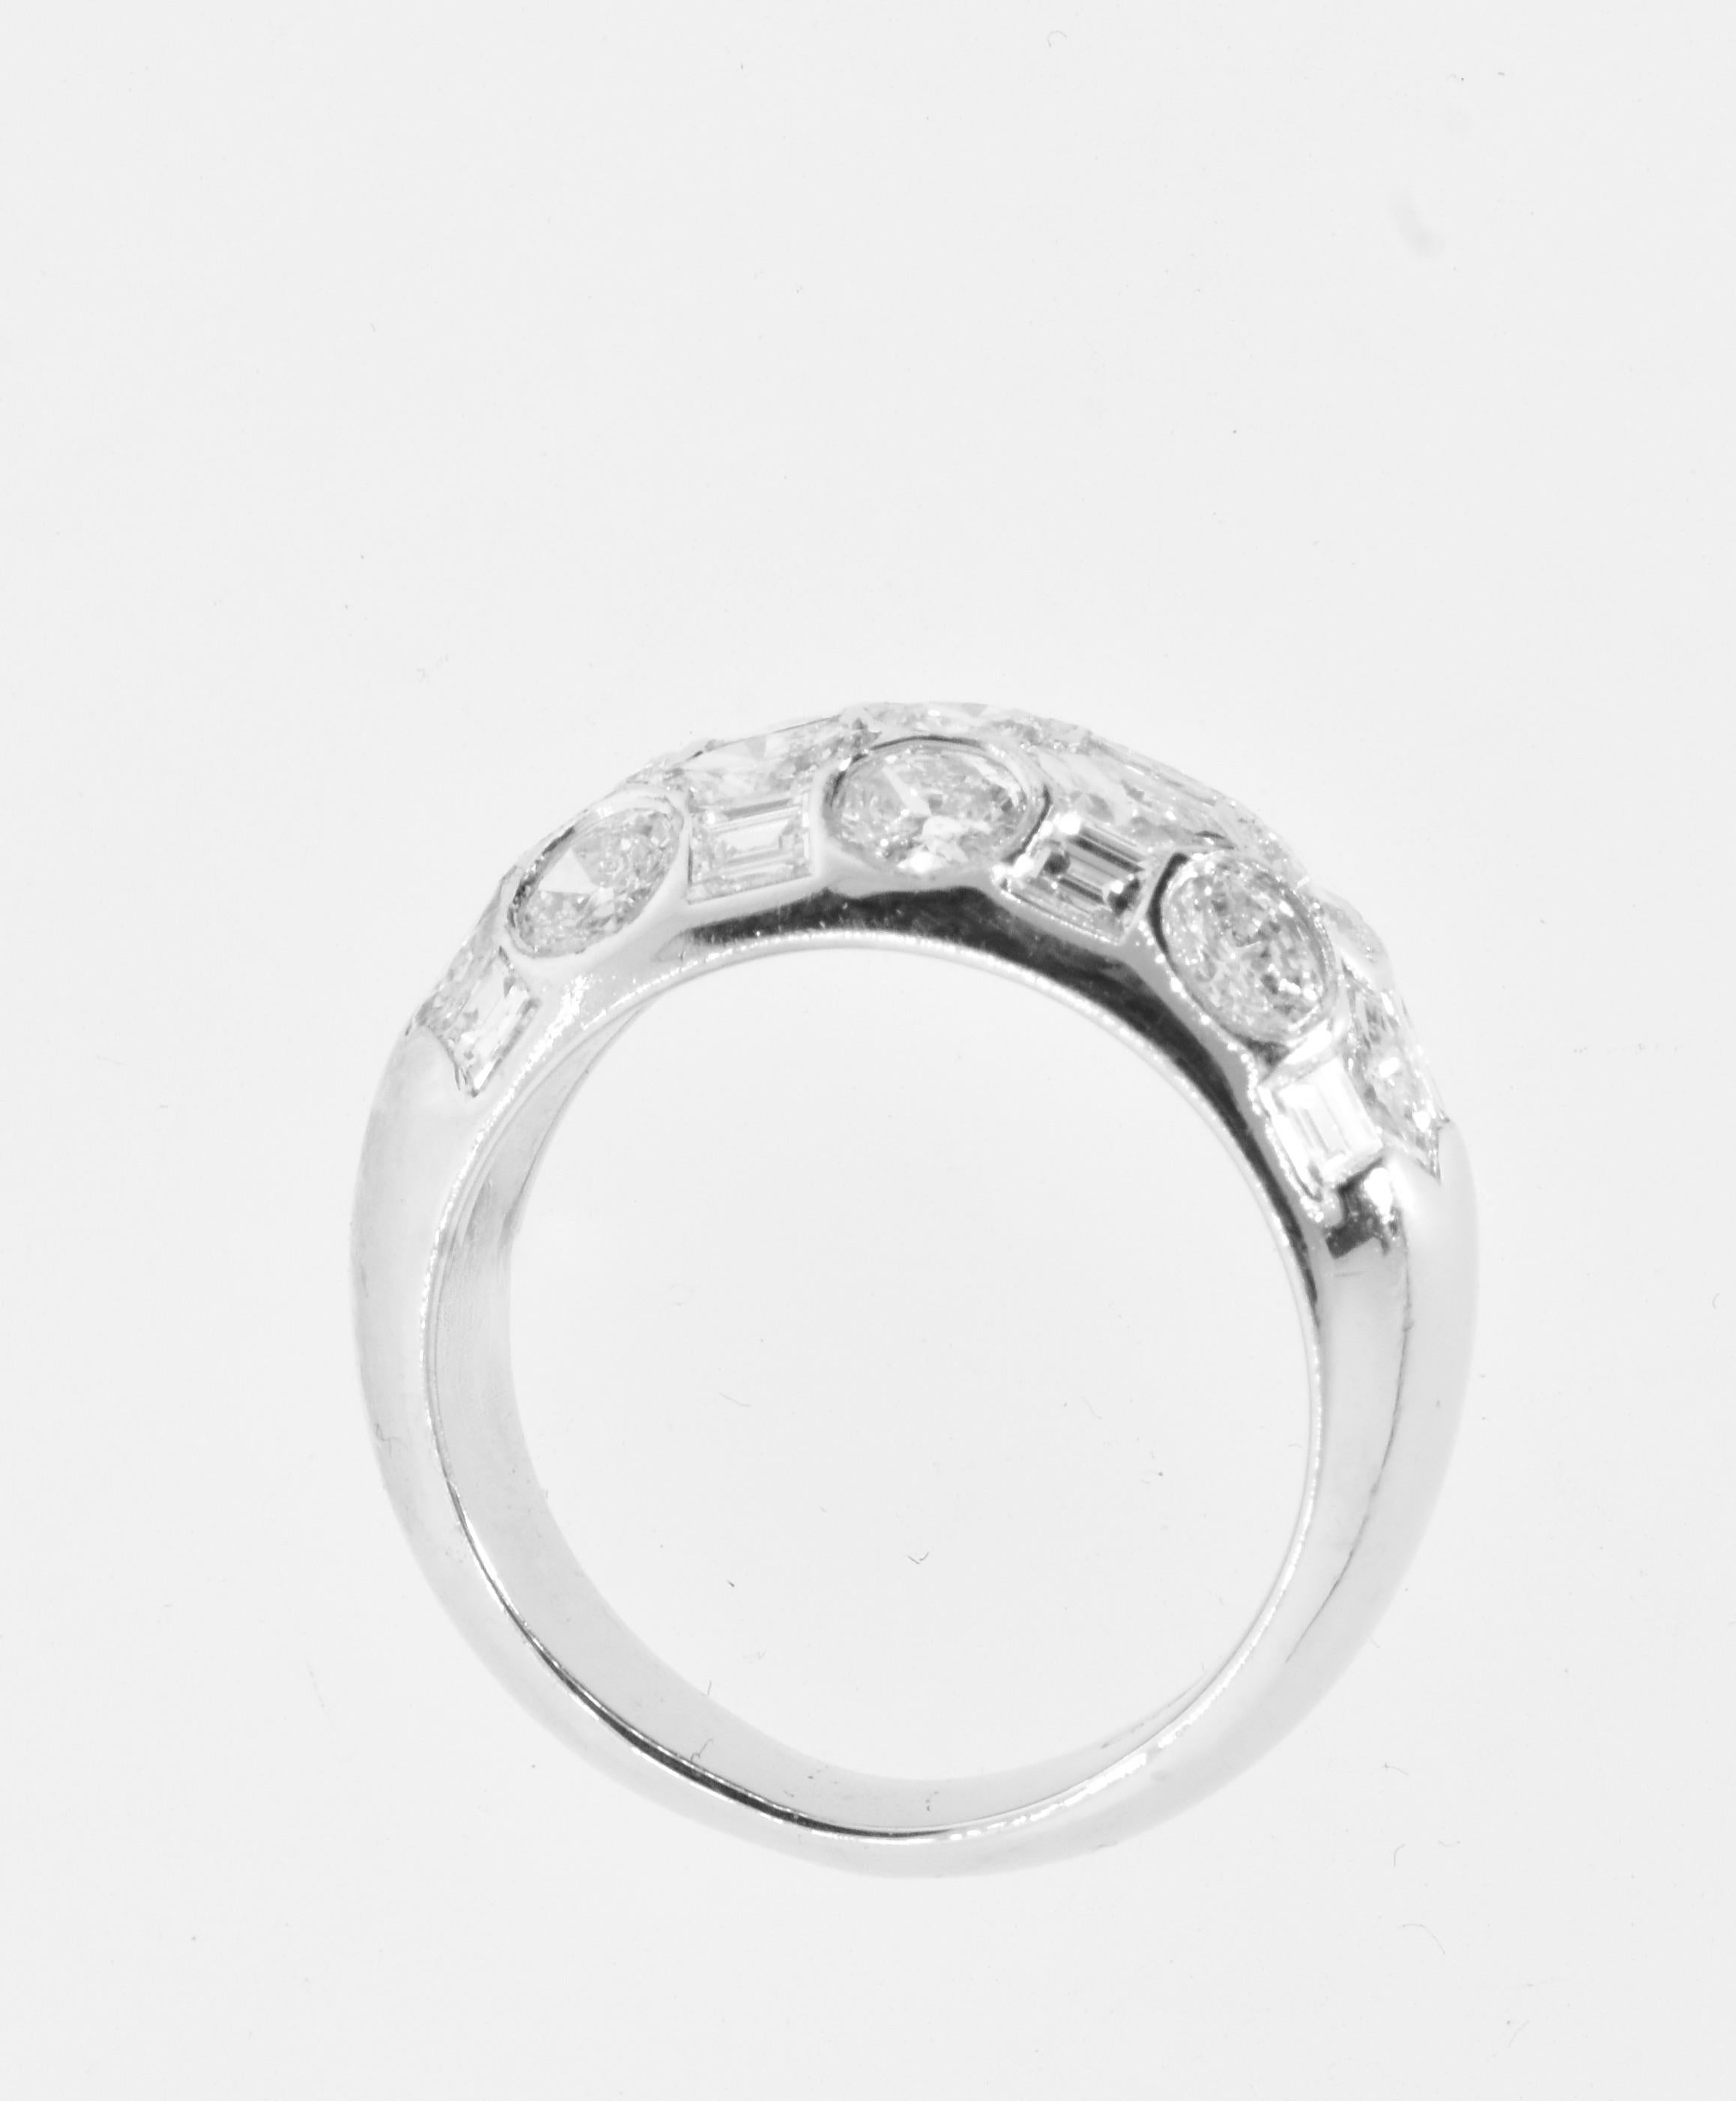 Fancy Cut Diamond and 18K White Gold Ring 5